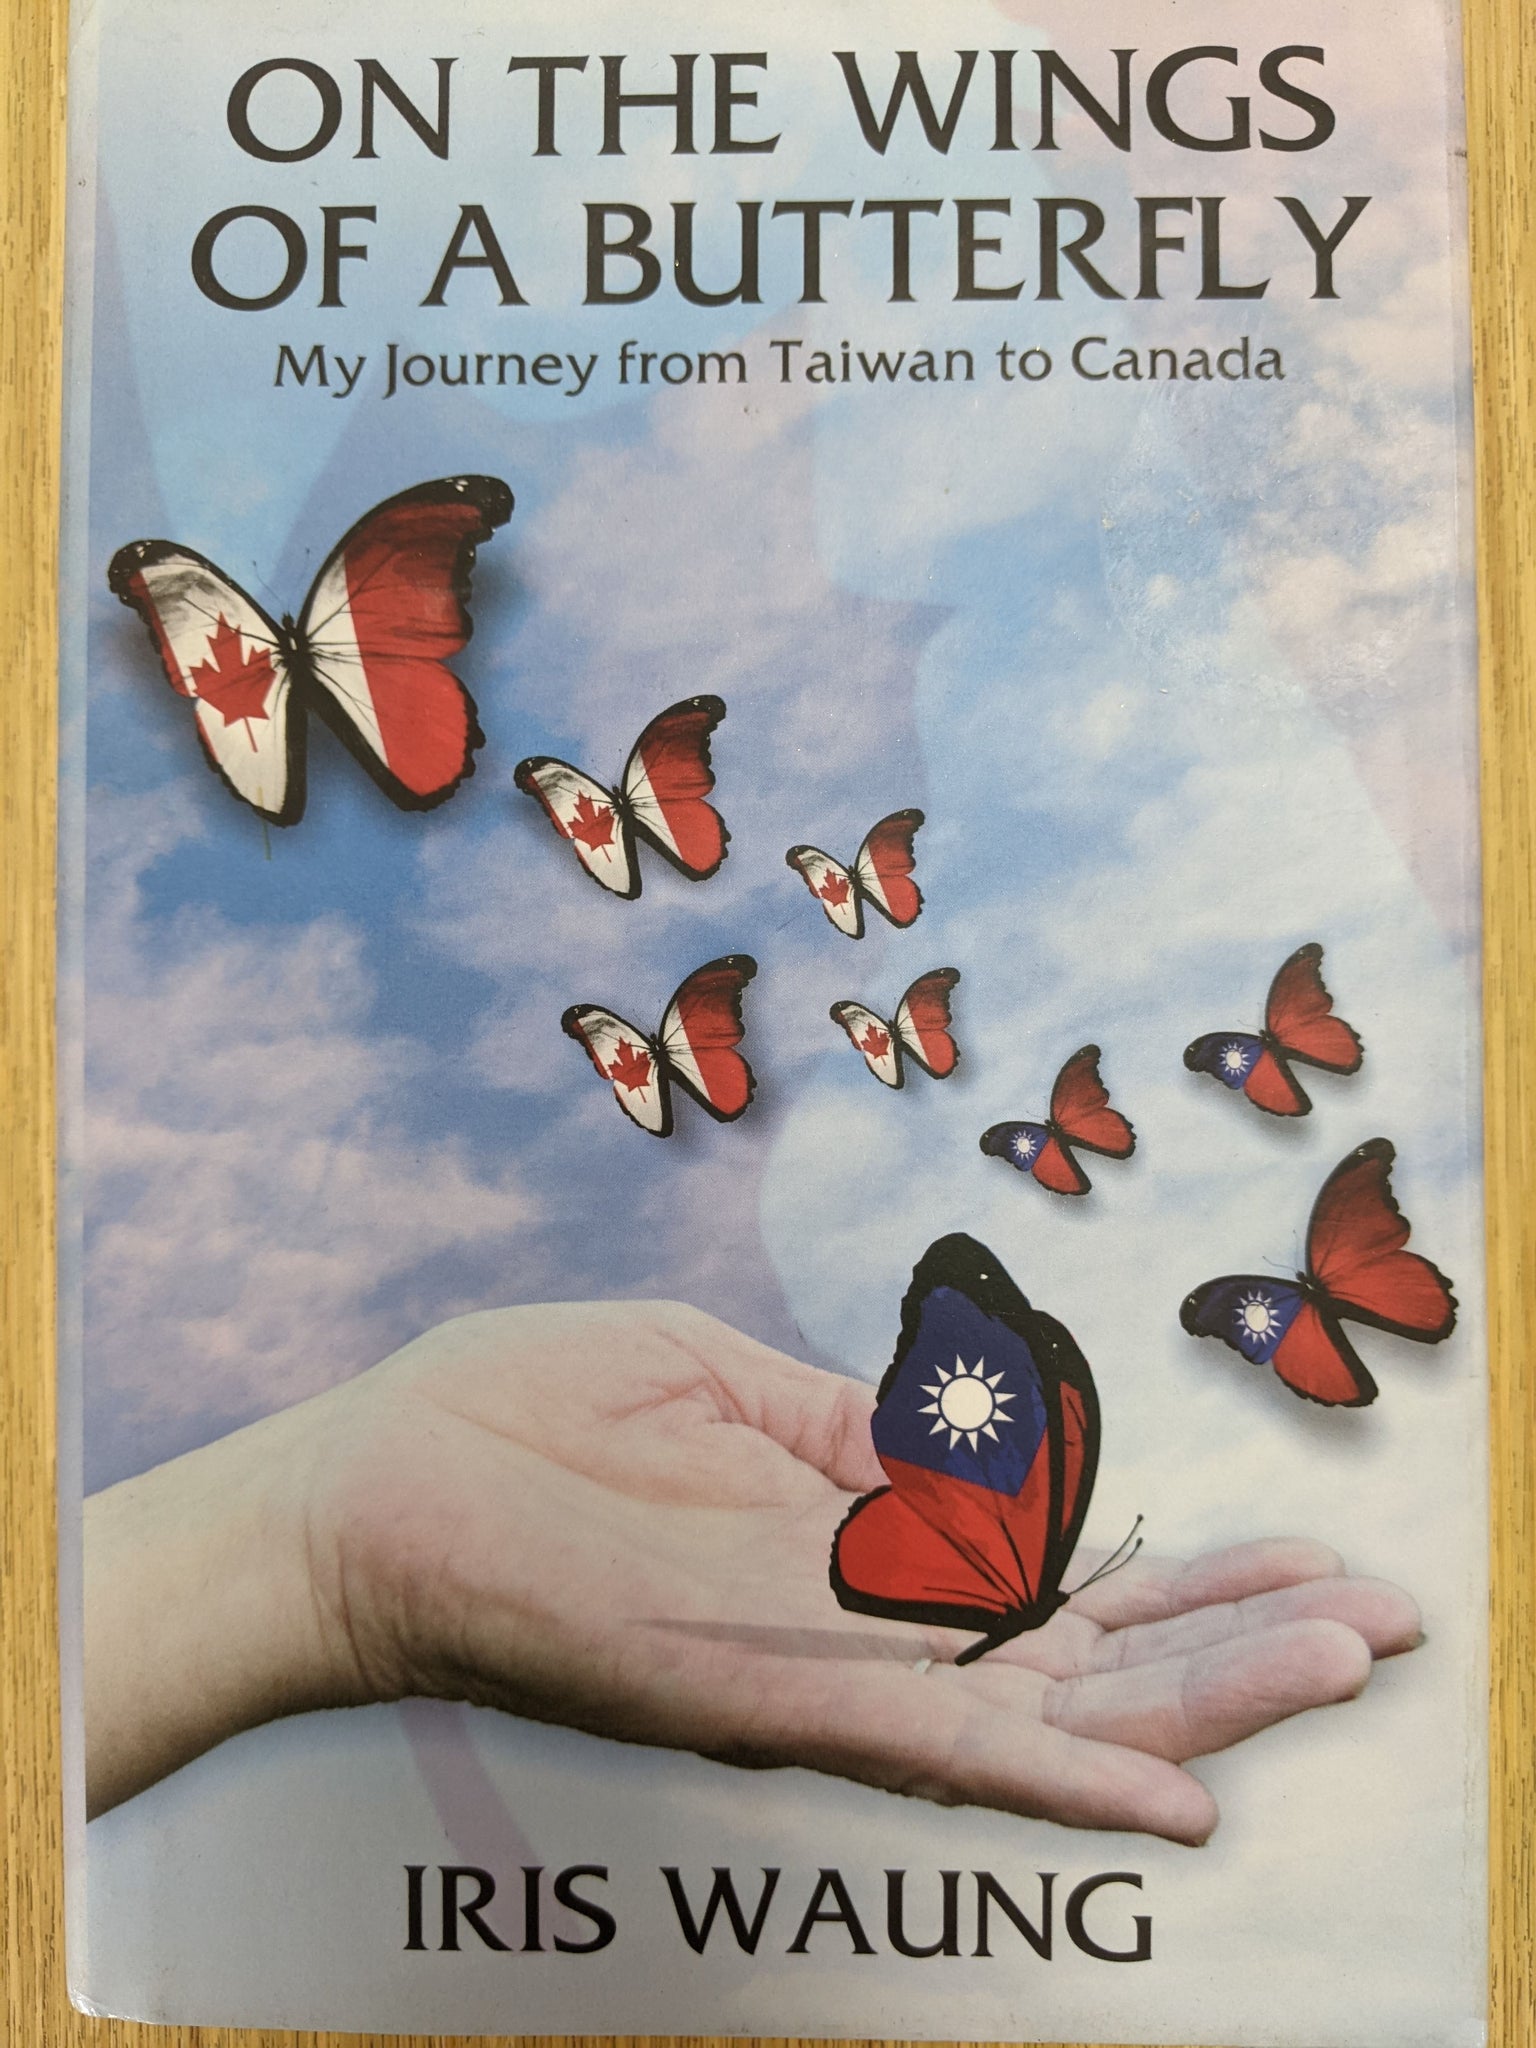 On the Wings of a Butterfly: My journey from Taiwan to Canada